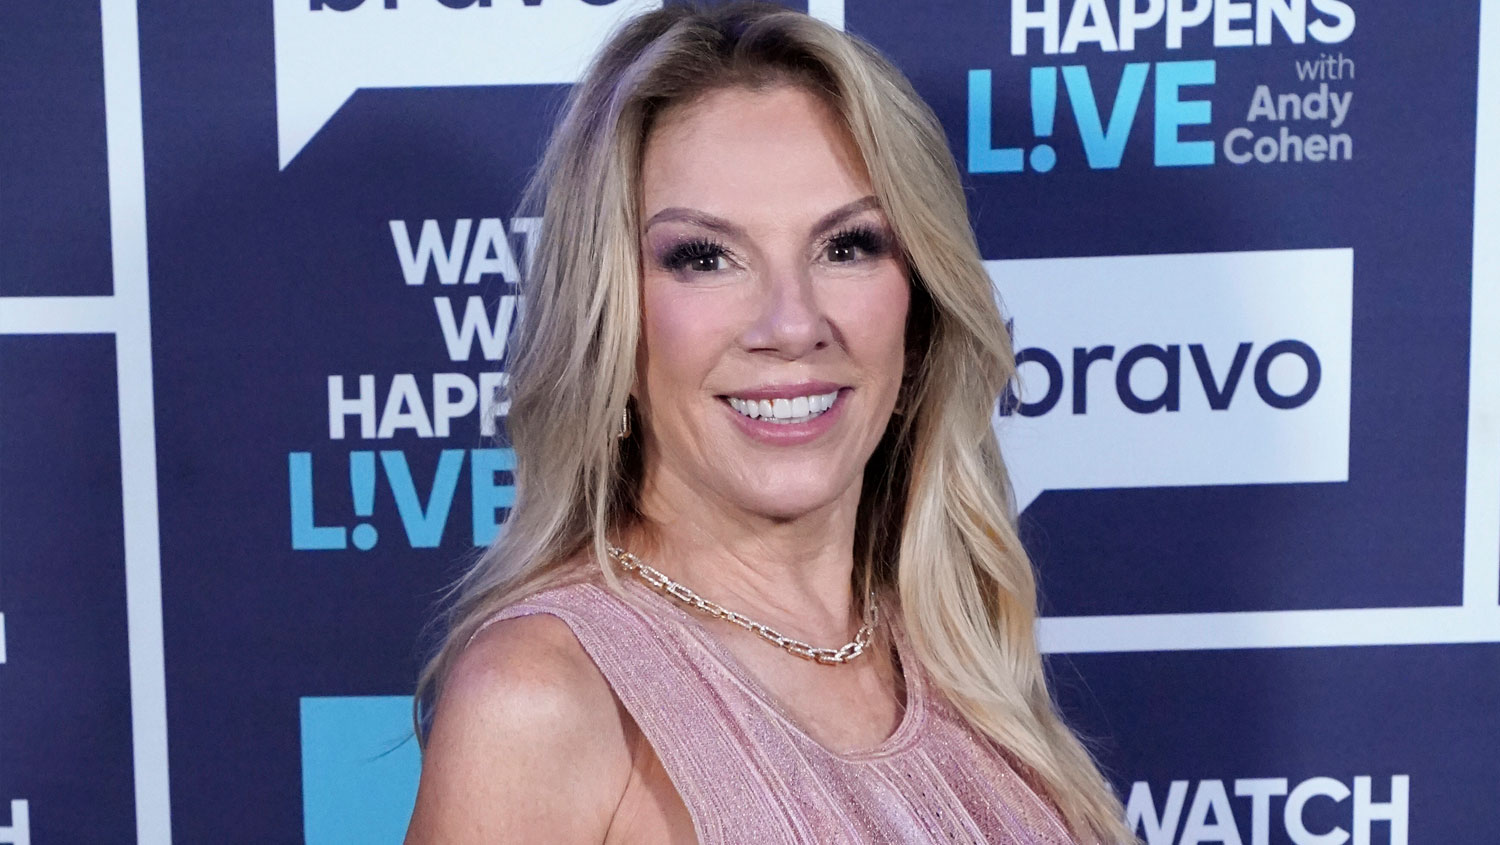 Former ‘RHONY’ Star Ramona Singer Dropped From BravoCon After Racial Slur